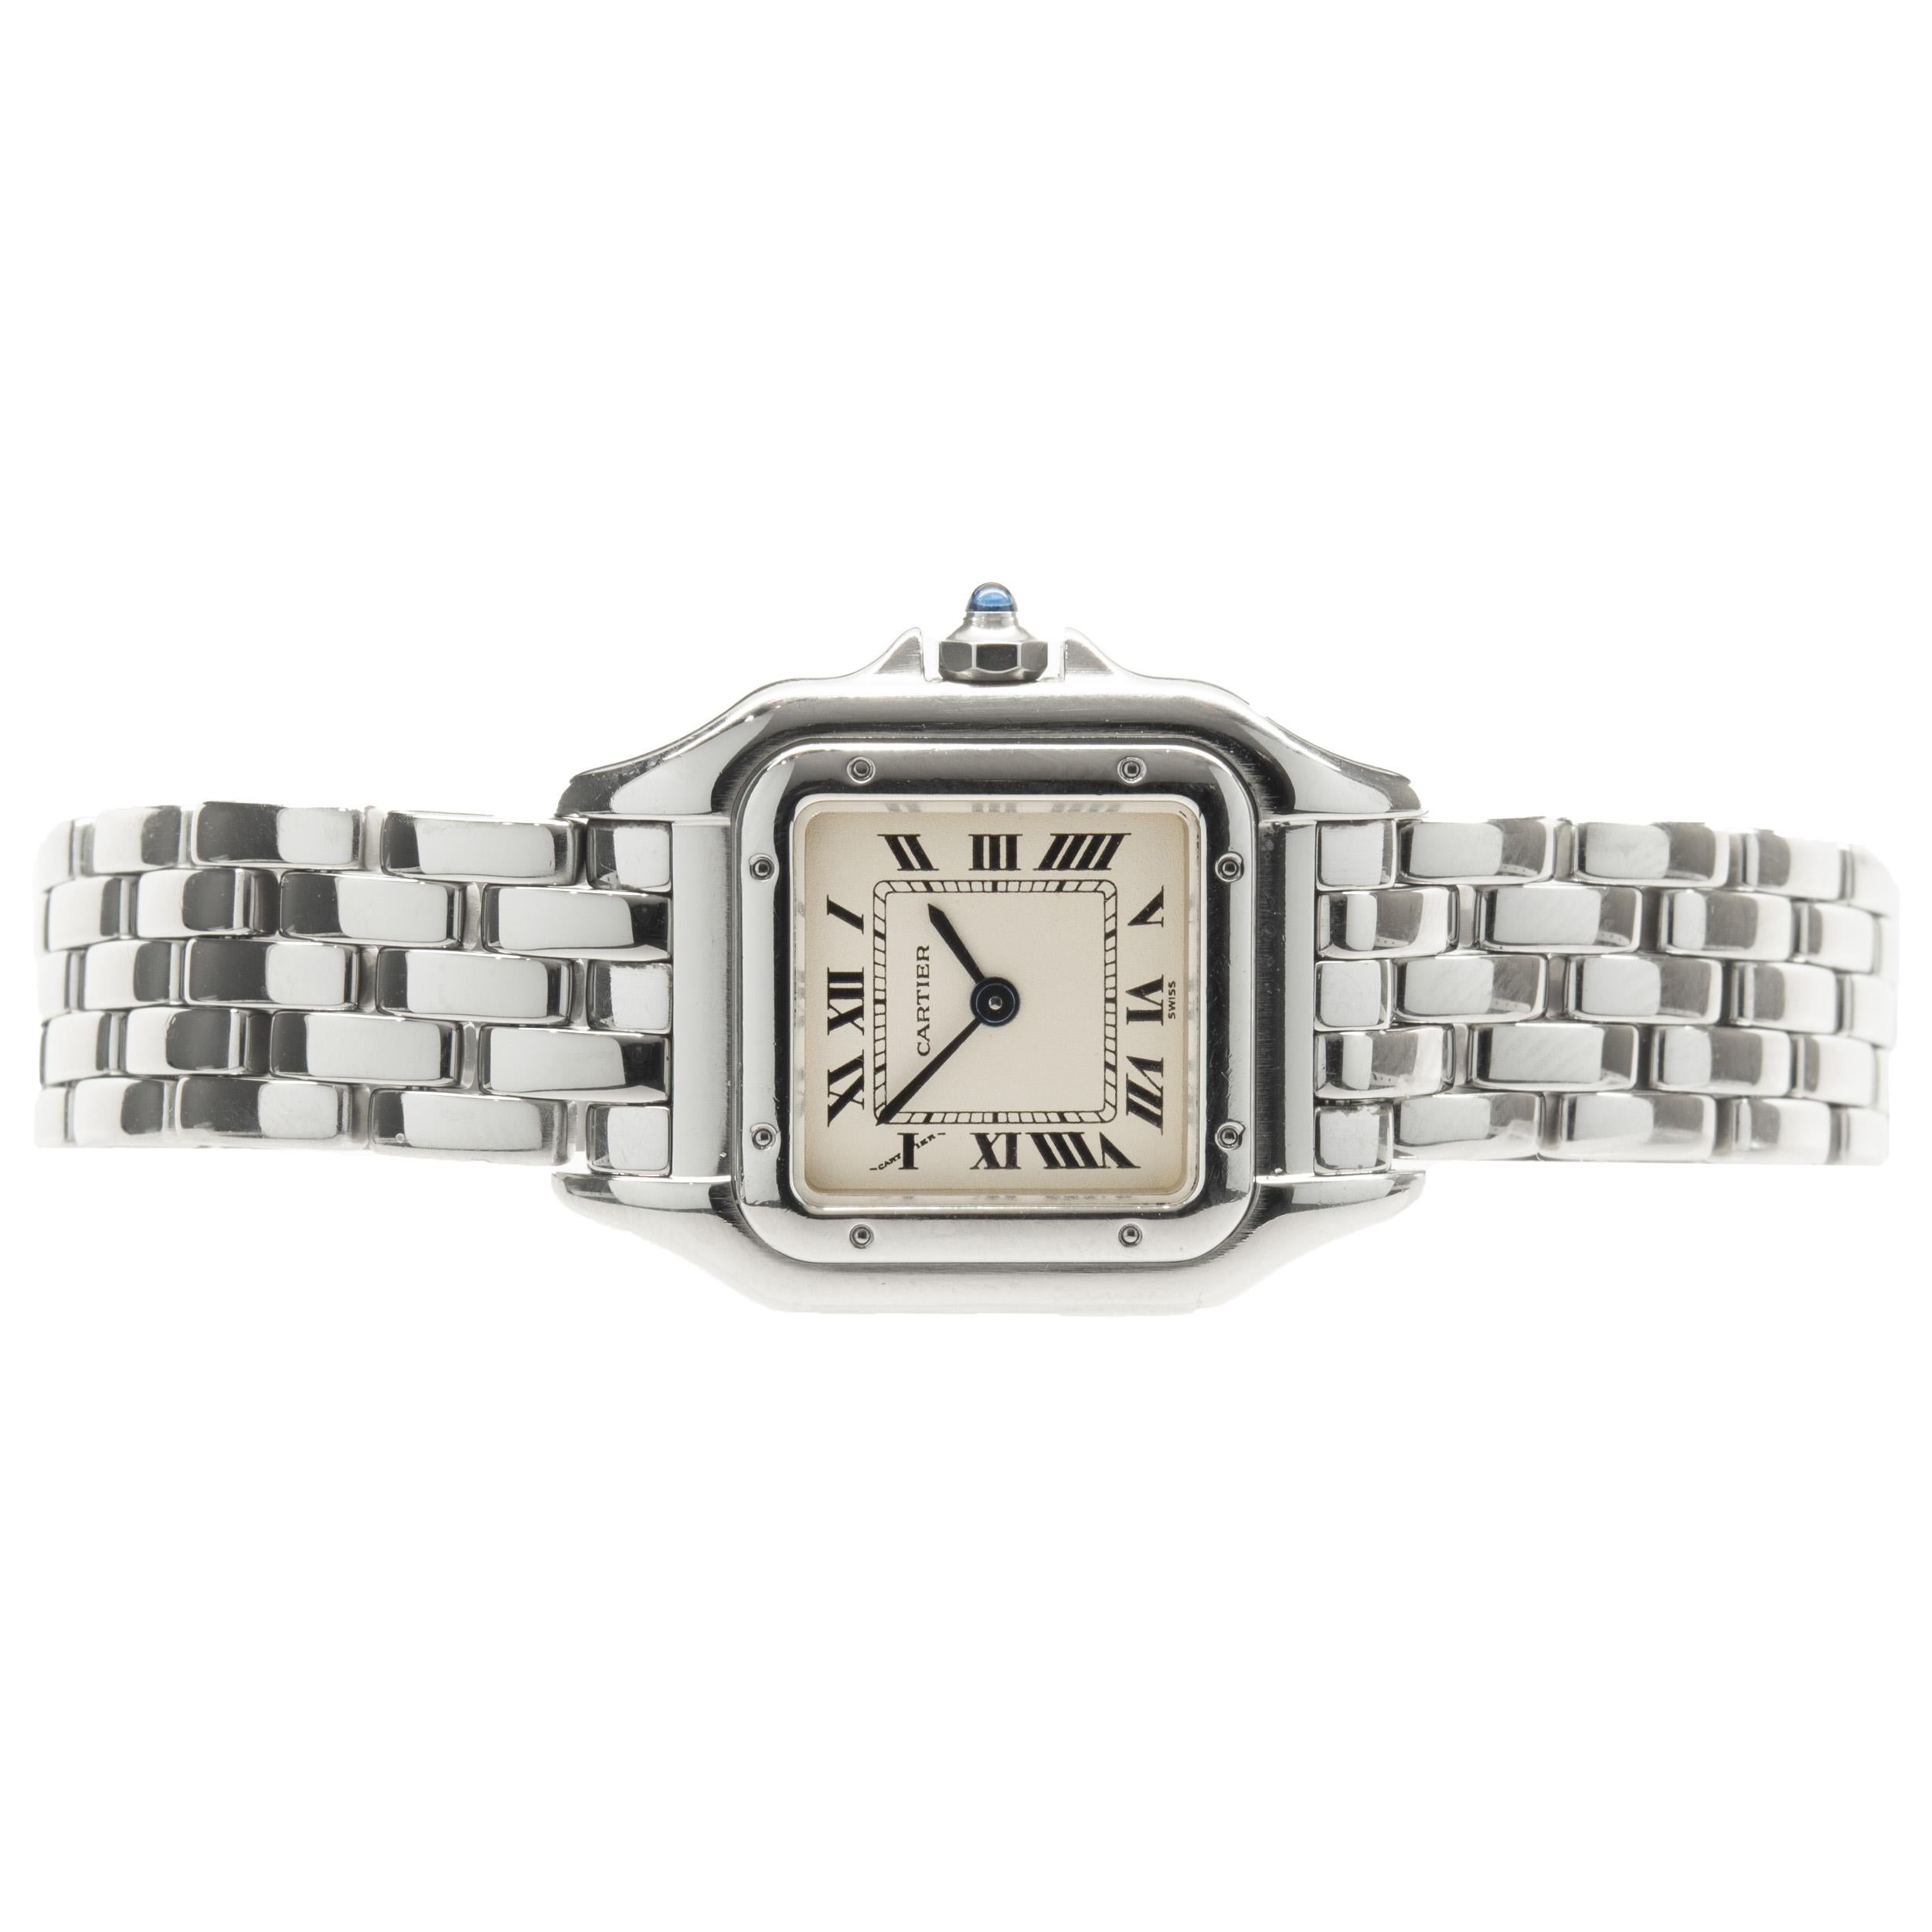 Movement: automatic
Function: hours, minutes, seconds
Case: 22mm stainless steel case, push pull crown, sapphire crystal
Dial: white roman dial, steel sword sweeping hands
Band: Cartier stainless steel panther bracelet, fold over butterfly